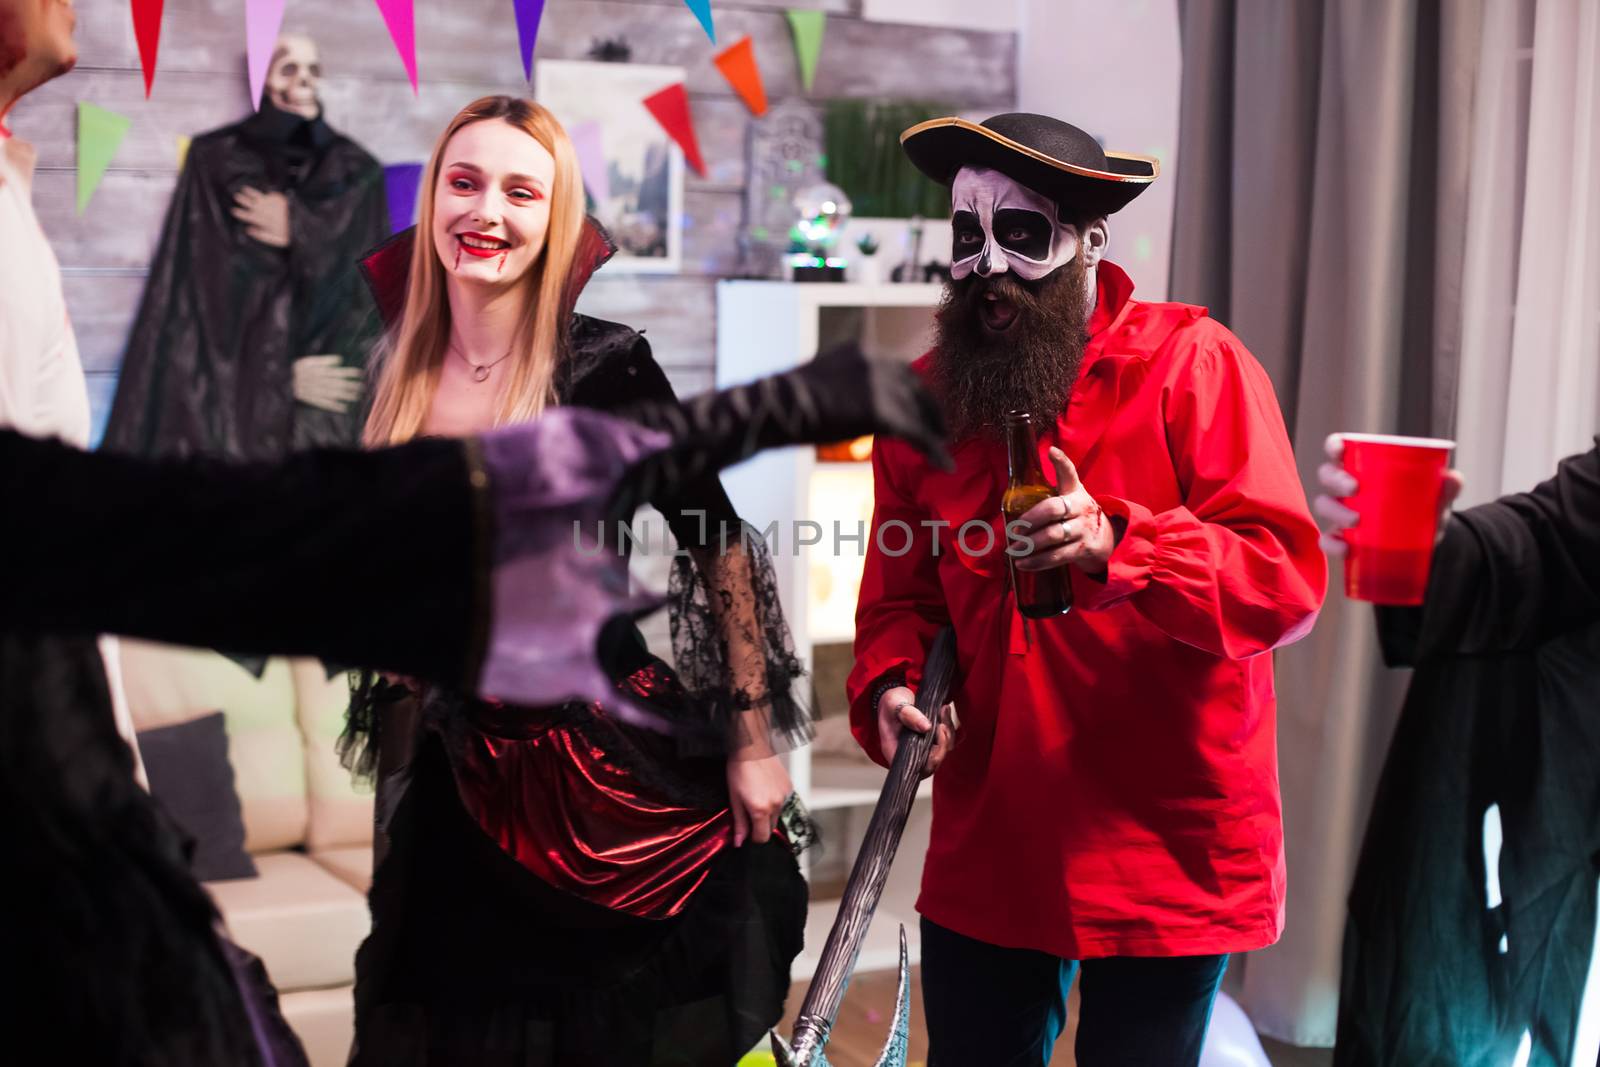 Man and woman dressed up like a pirate and vampire at halloween celebration with their friends.